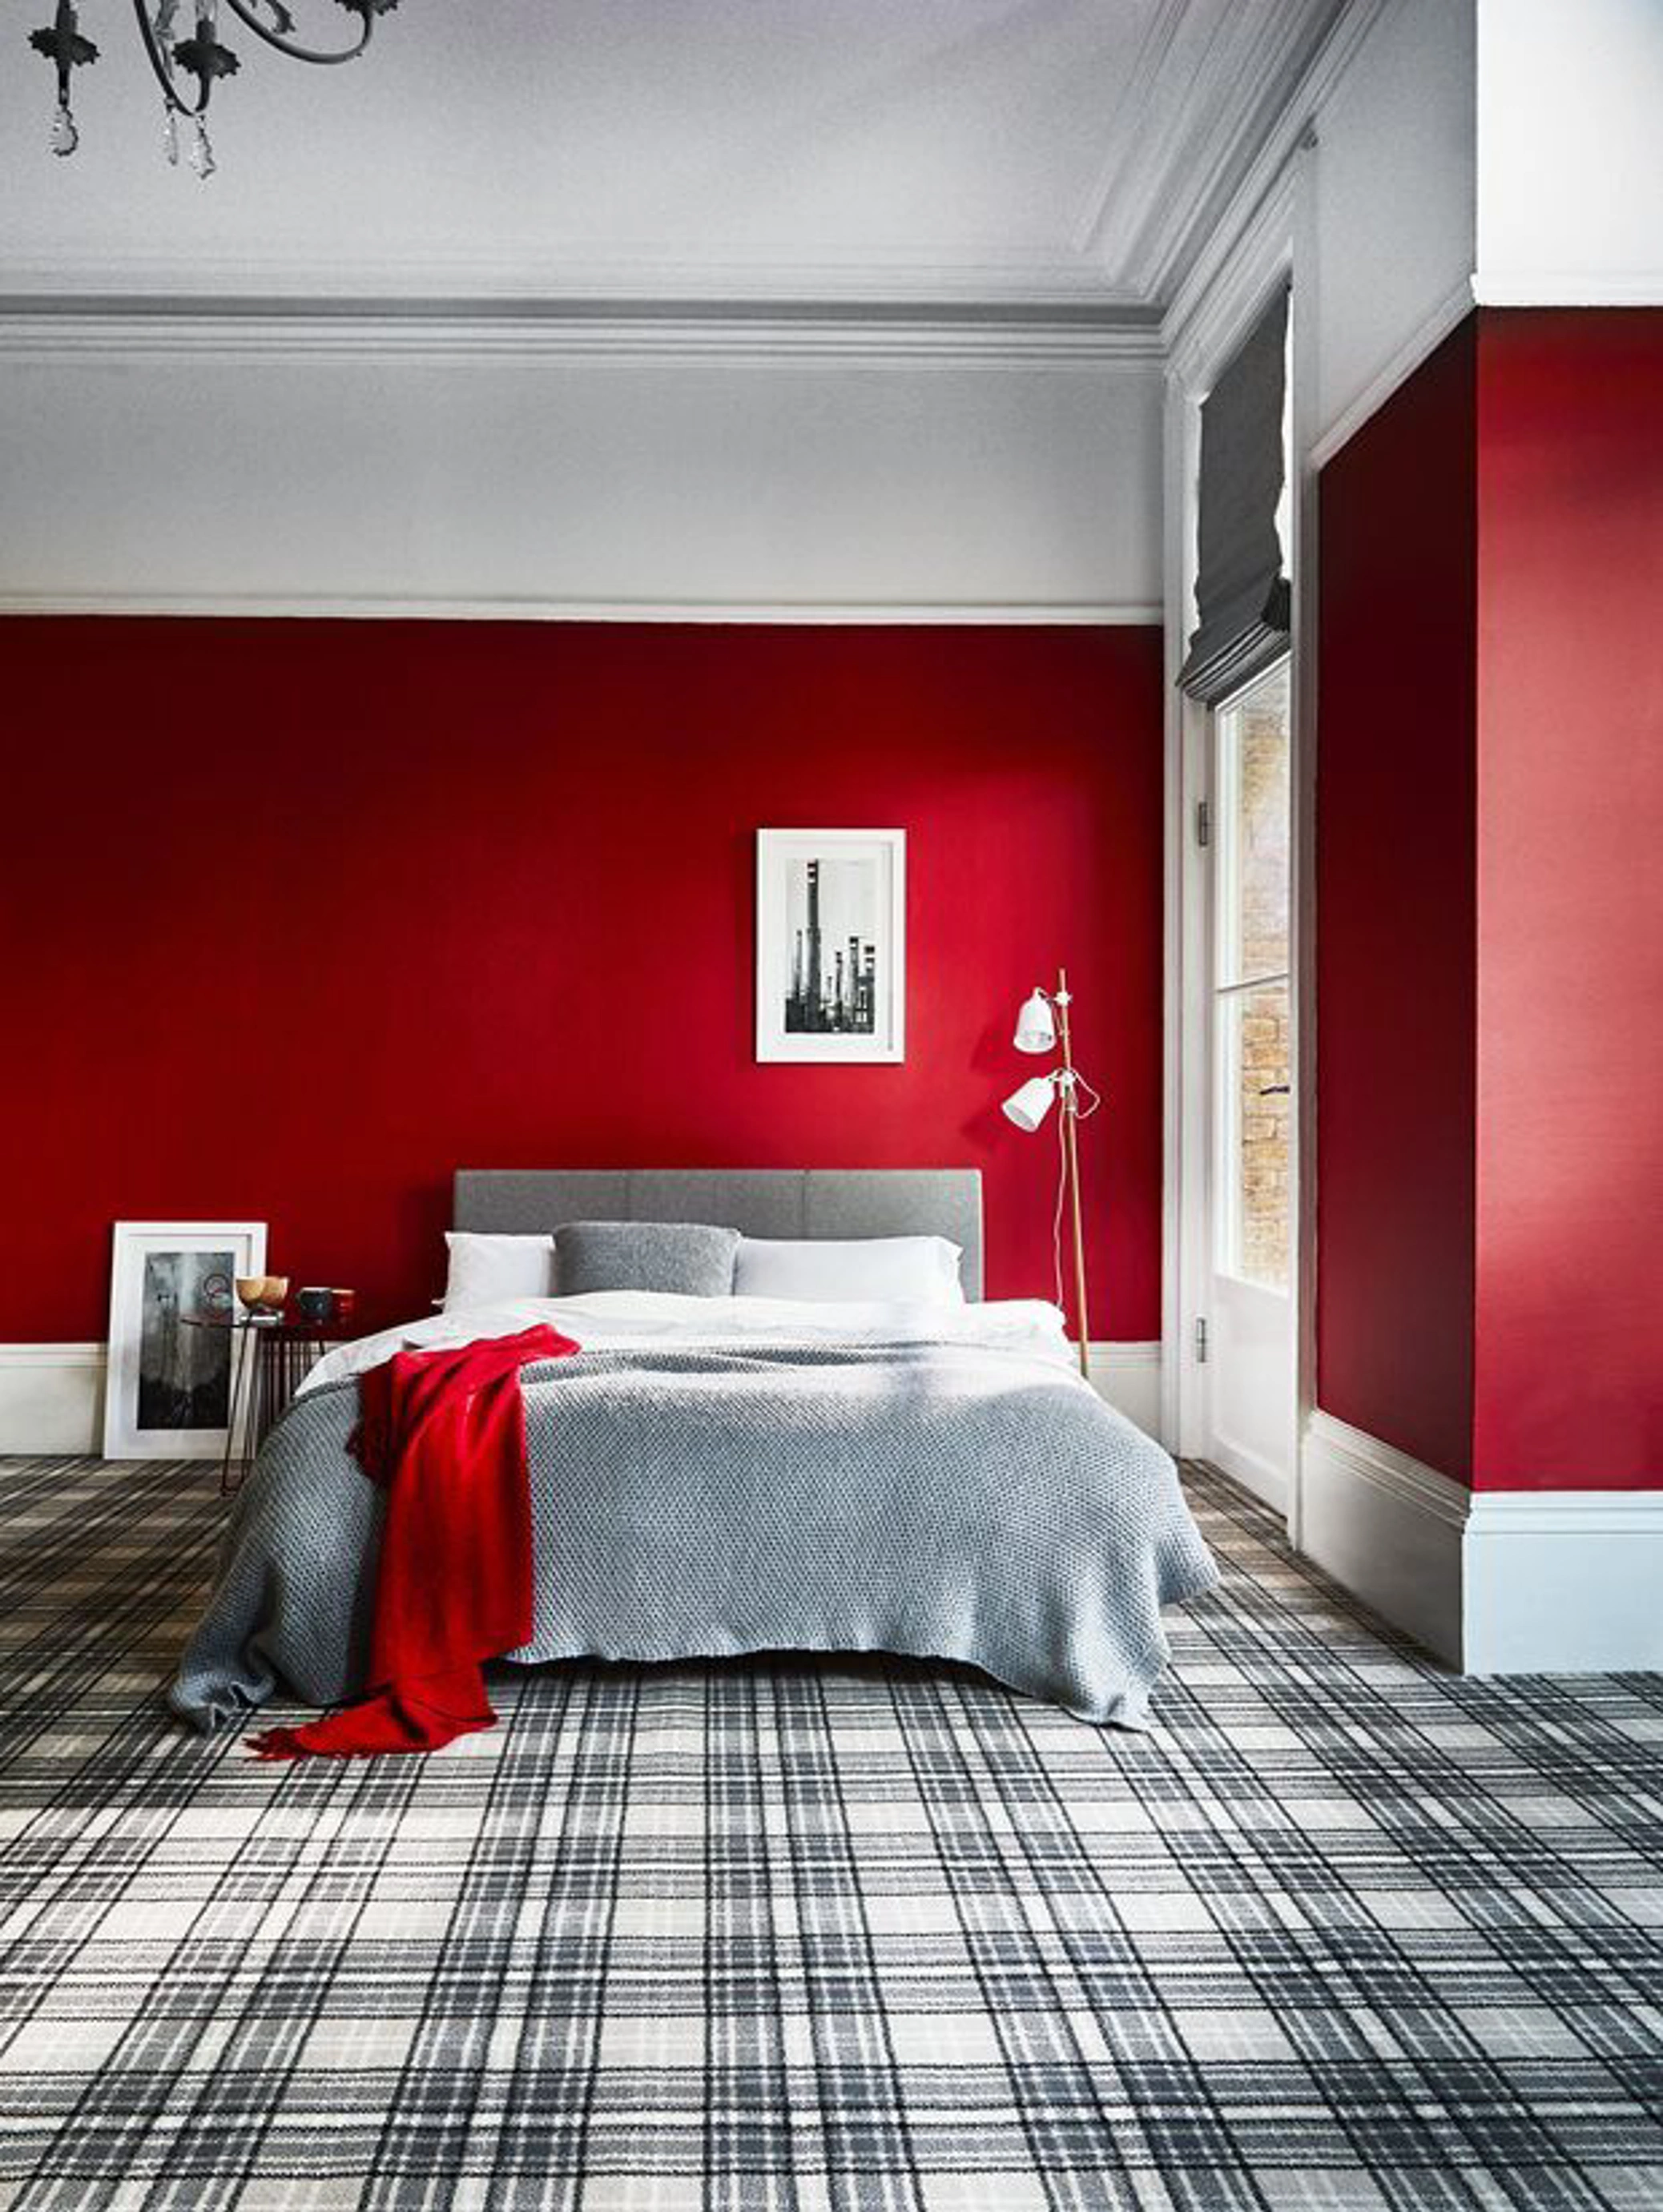 Bedroom with red walls and chequered carpet